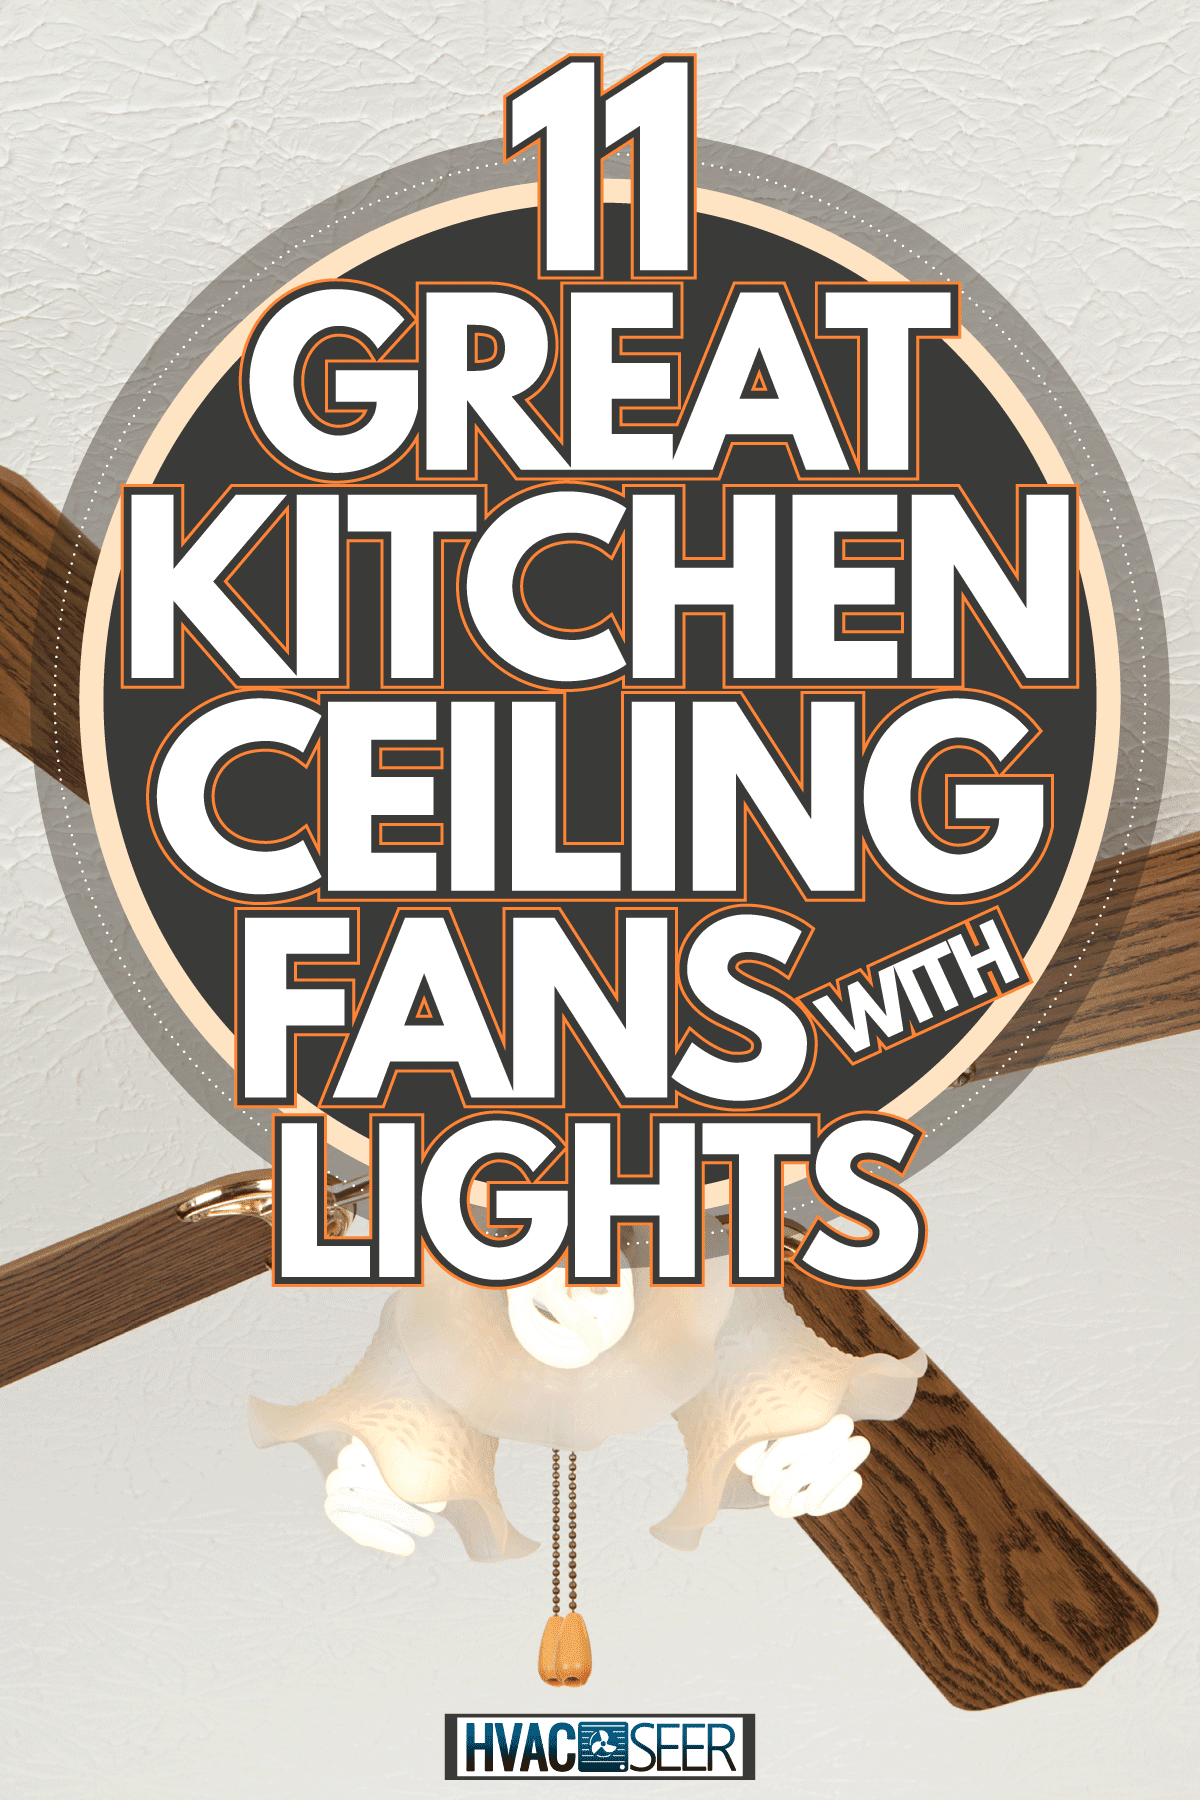 Ceiling fan with compact florescent light bulbs, 11 Great Kitchen Ceiling Fans With Lights